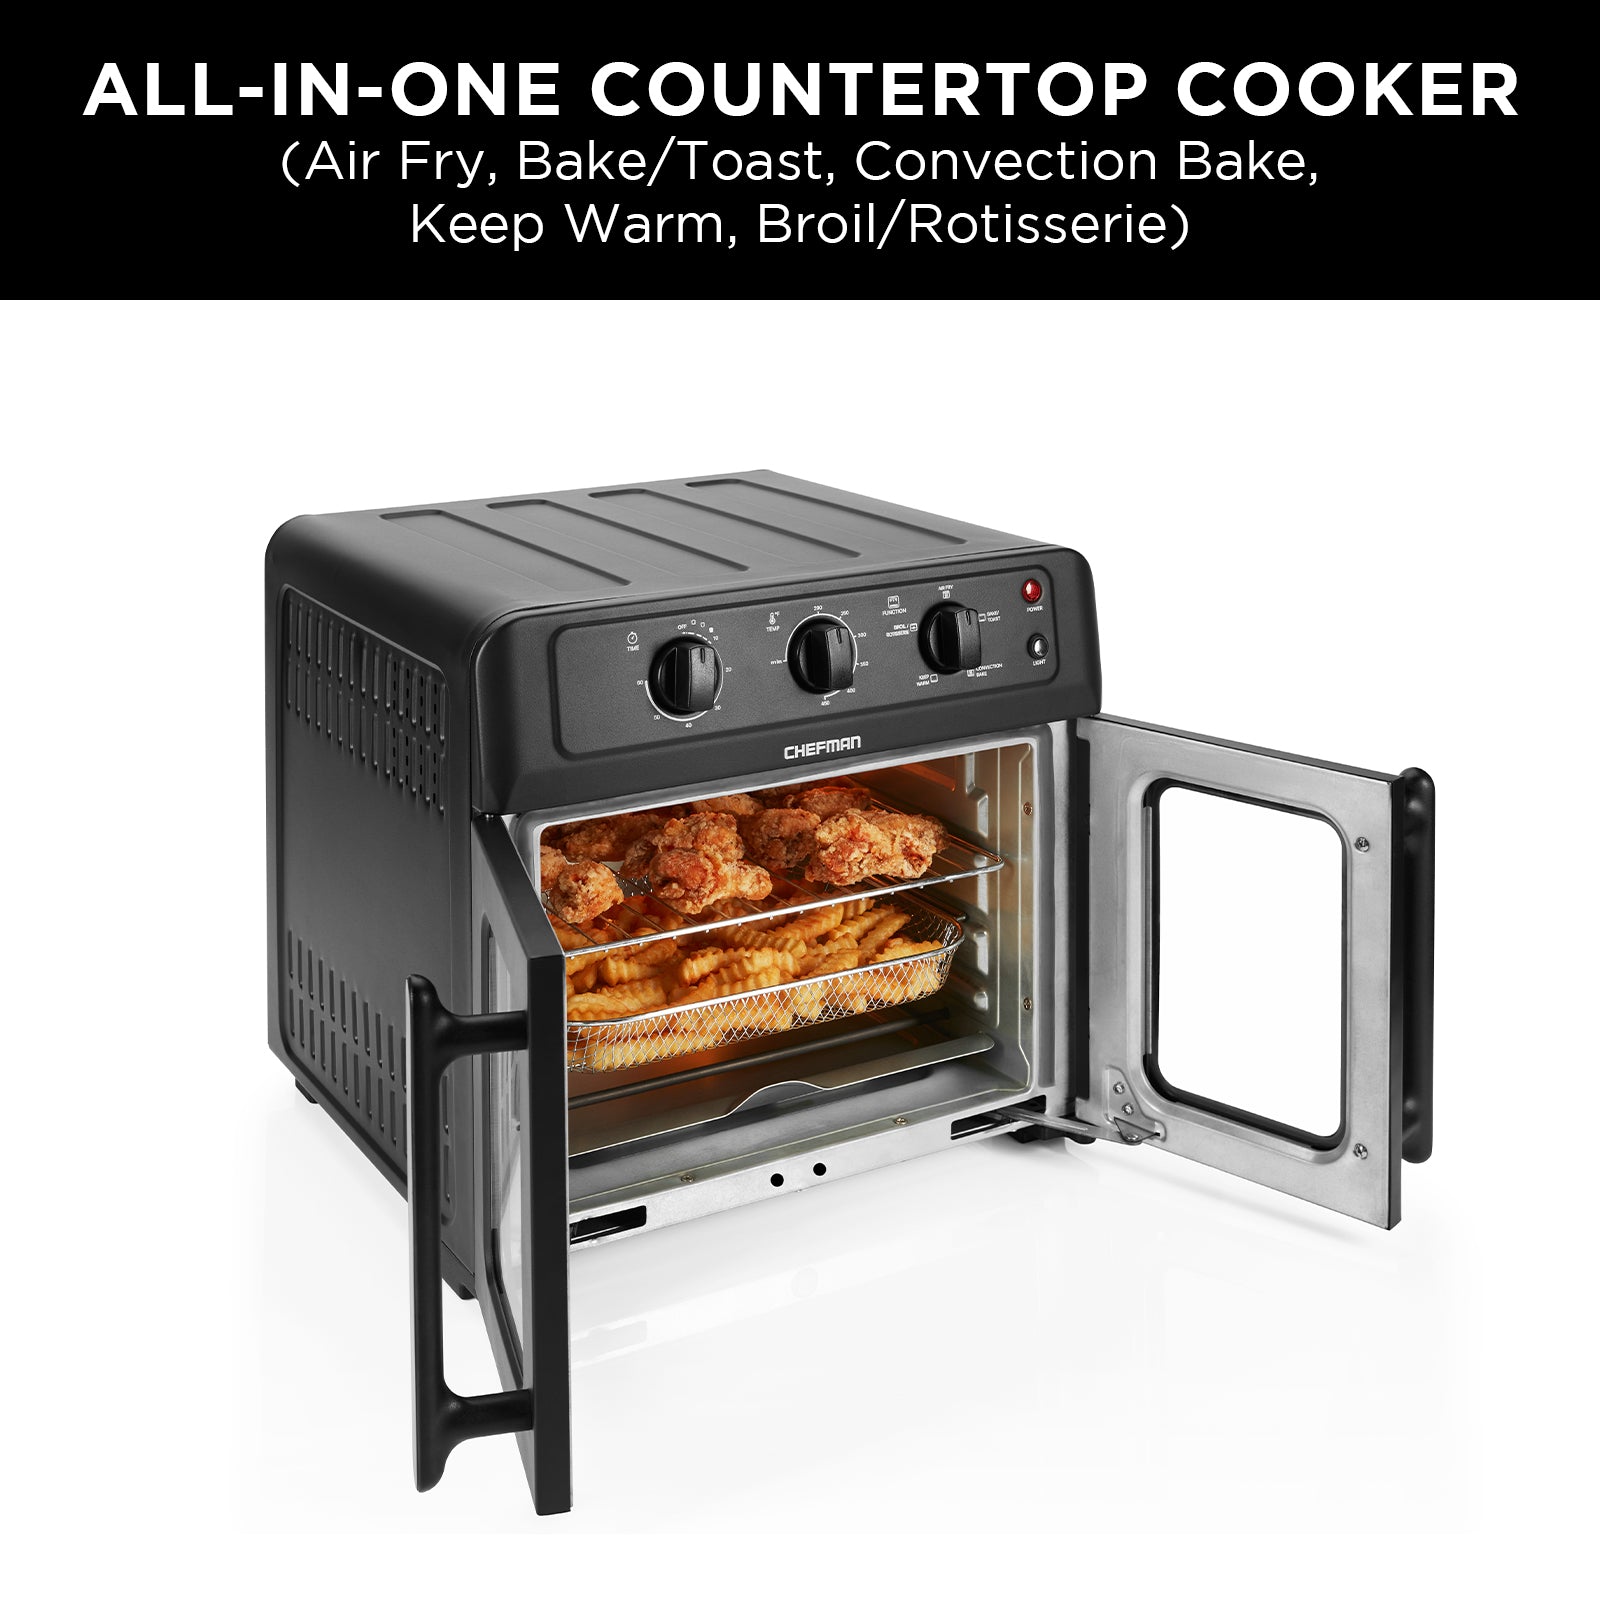 Chefman RJ50-SS-M20, Convection Toaster Oven Air Fryer